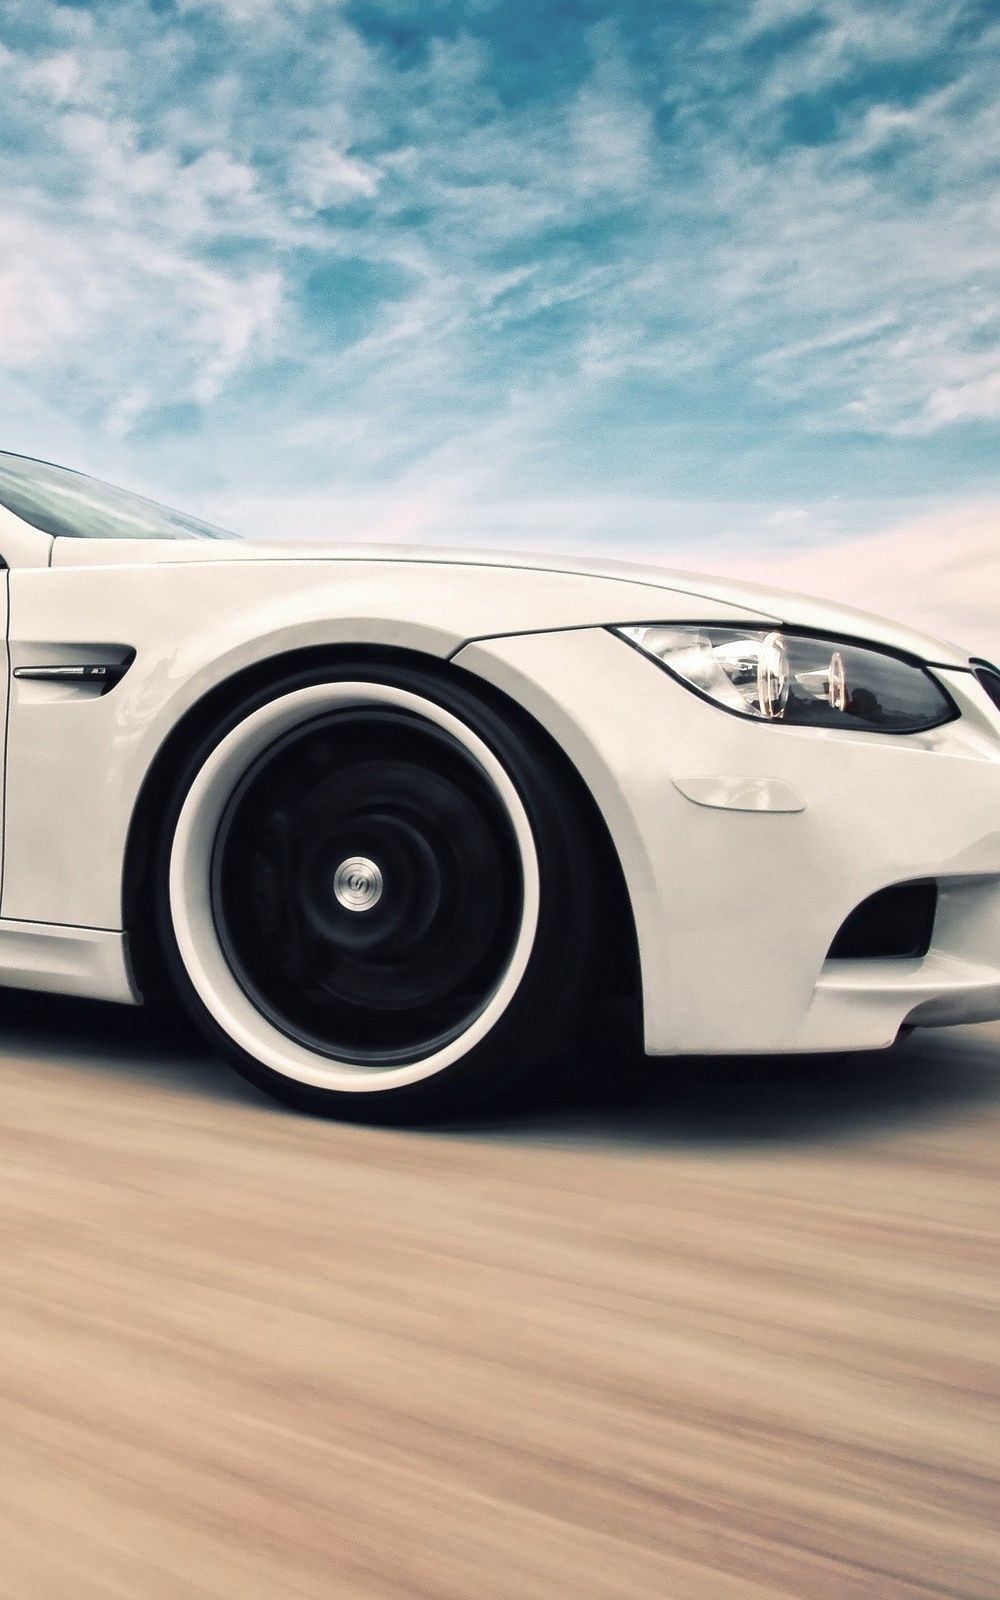 BMW M3 white super car wallpaper. iOS wallpaper and Android